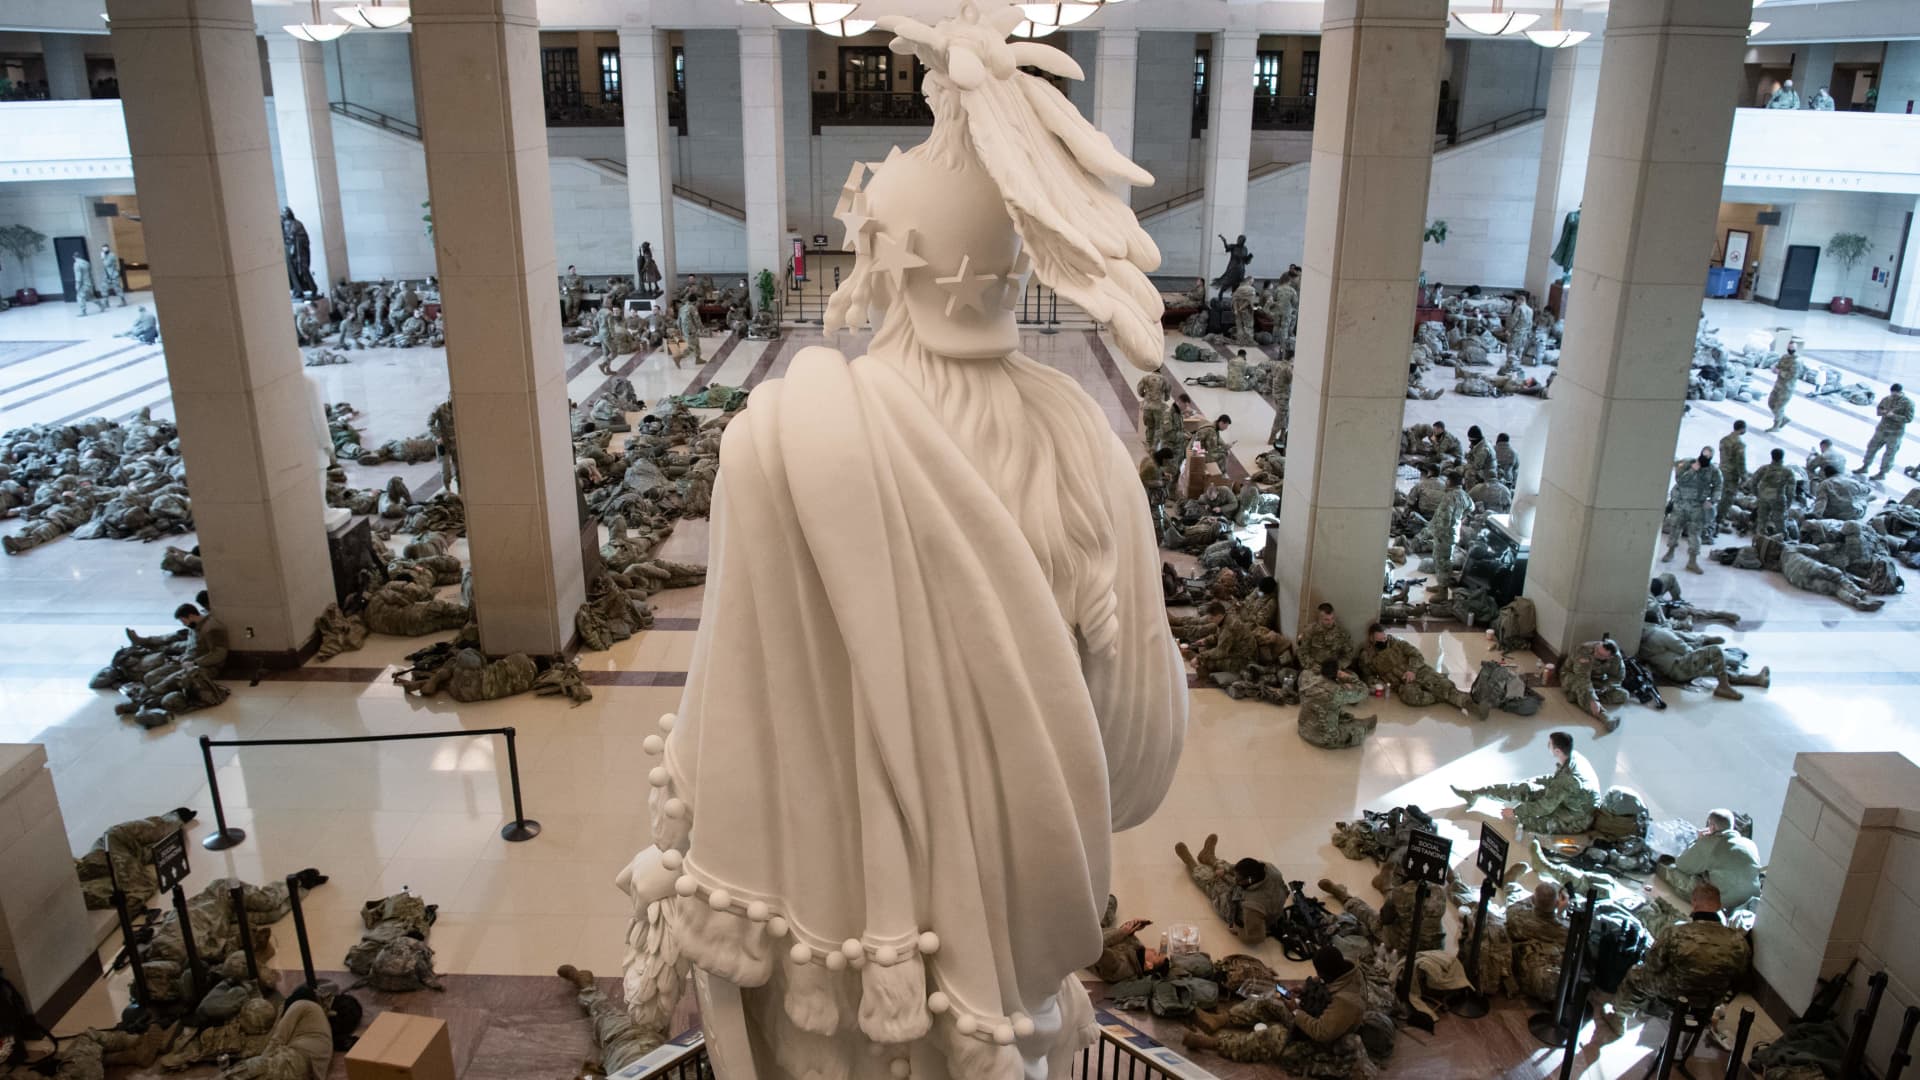 Members of the National Guard rest in the Capitol Visitors Center on Capitol Hill in Washington, DC, January 13, 2021, ahead of an expected House vote impeaching US President Donald Trump.